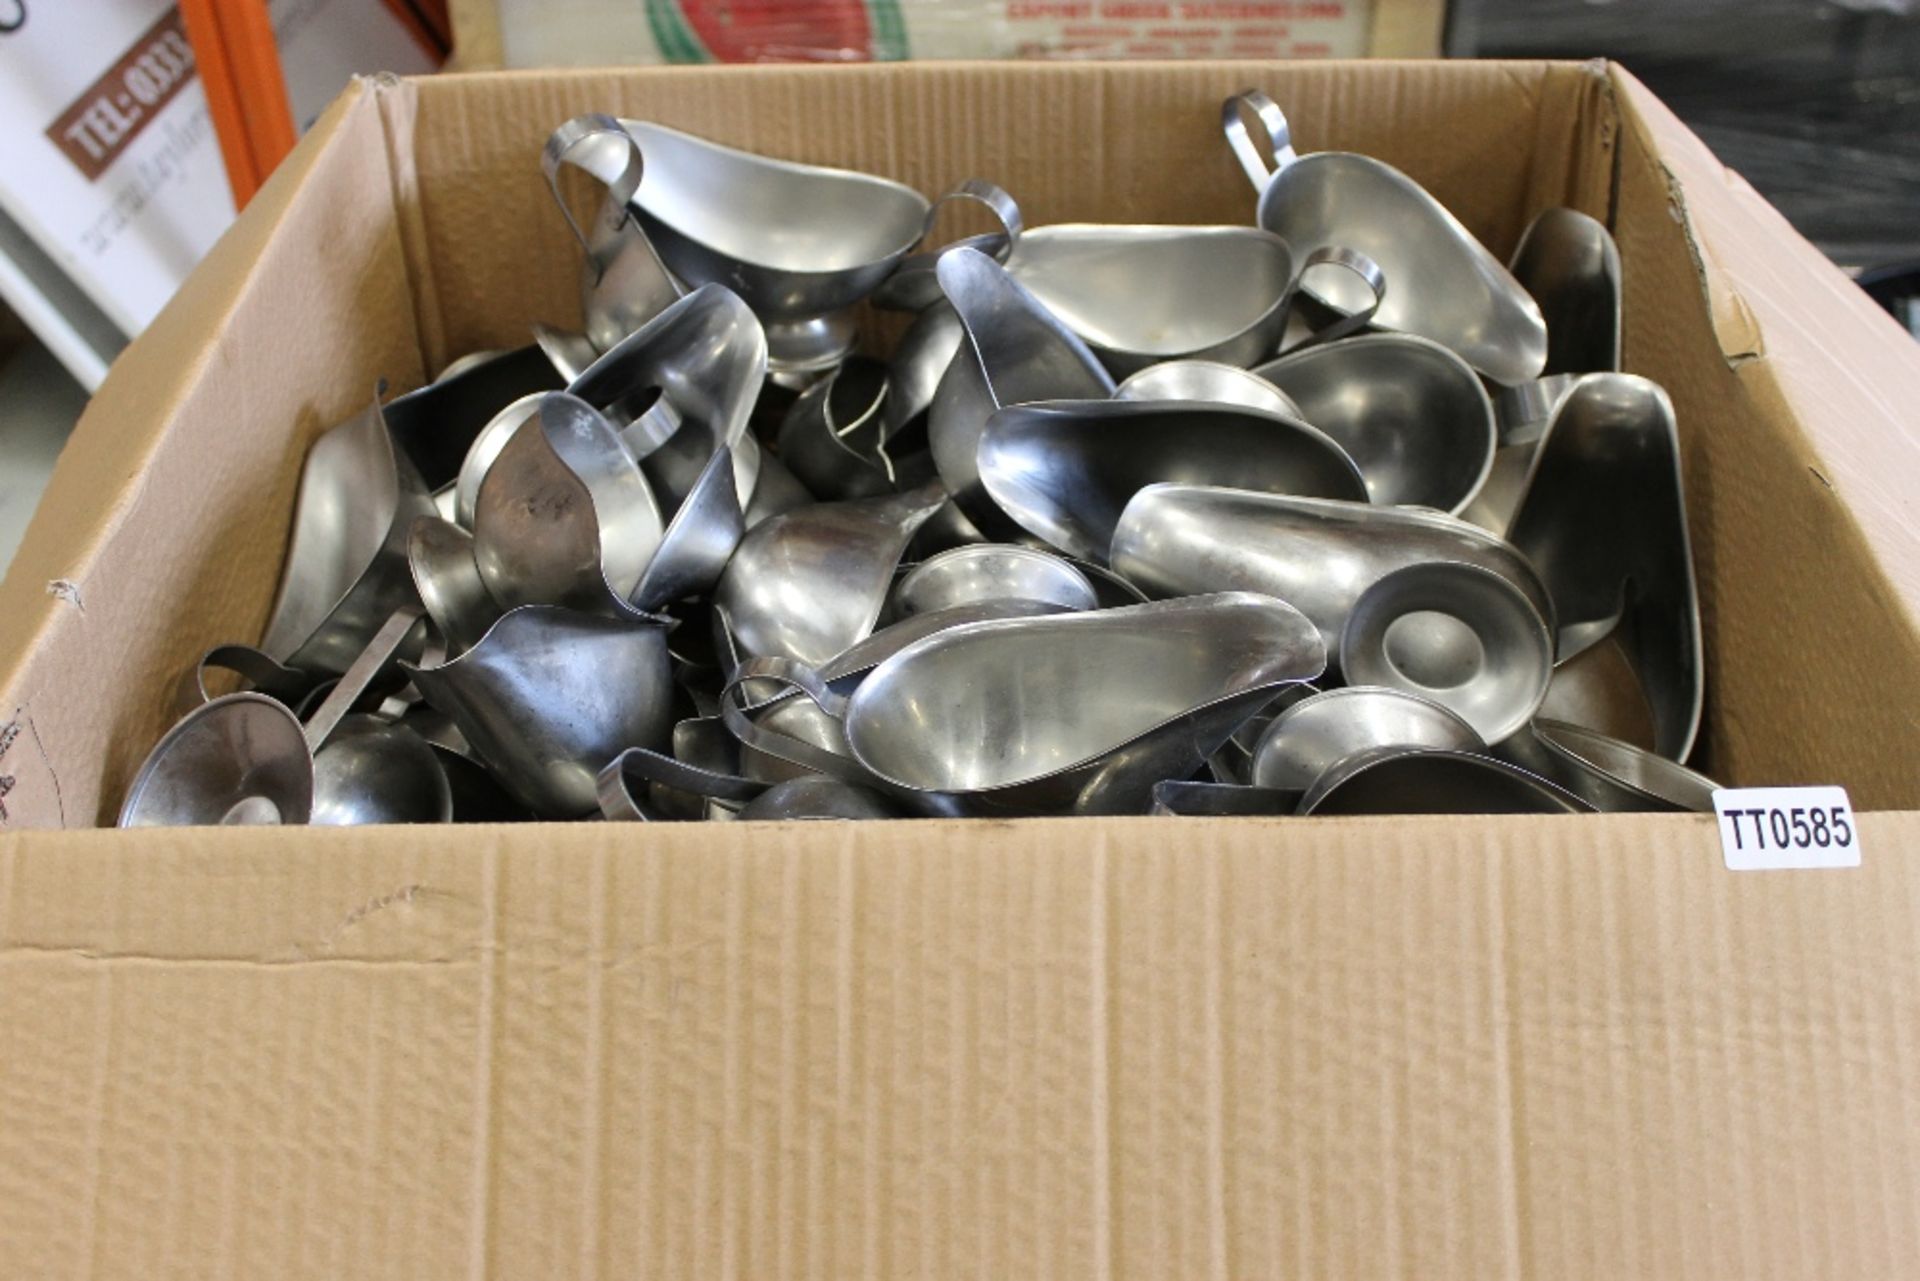 Large Number of Stainless Steel Gravy / Sauce Boats (approximately 35)